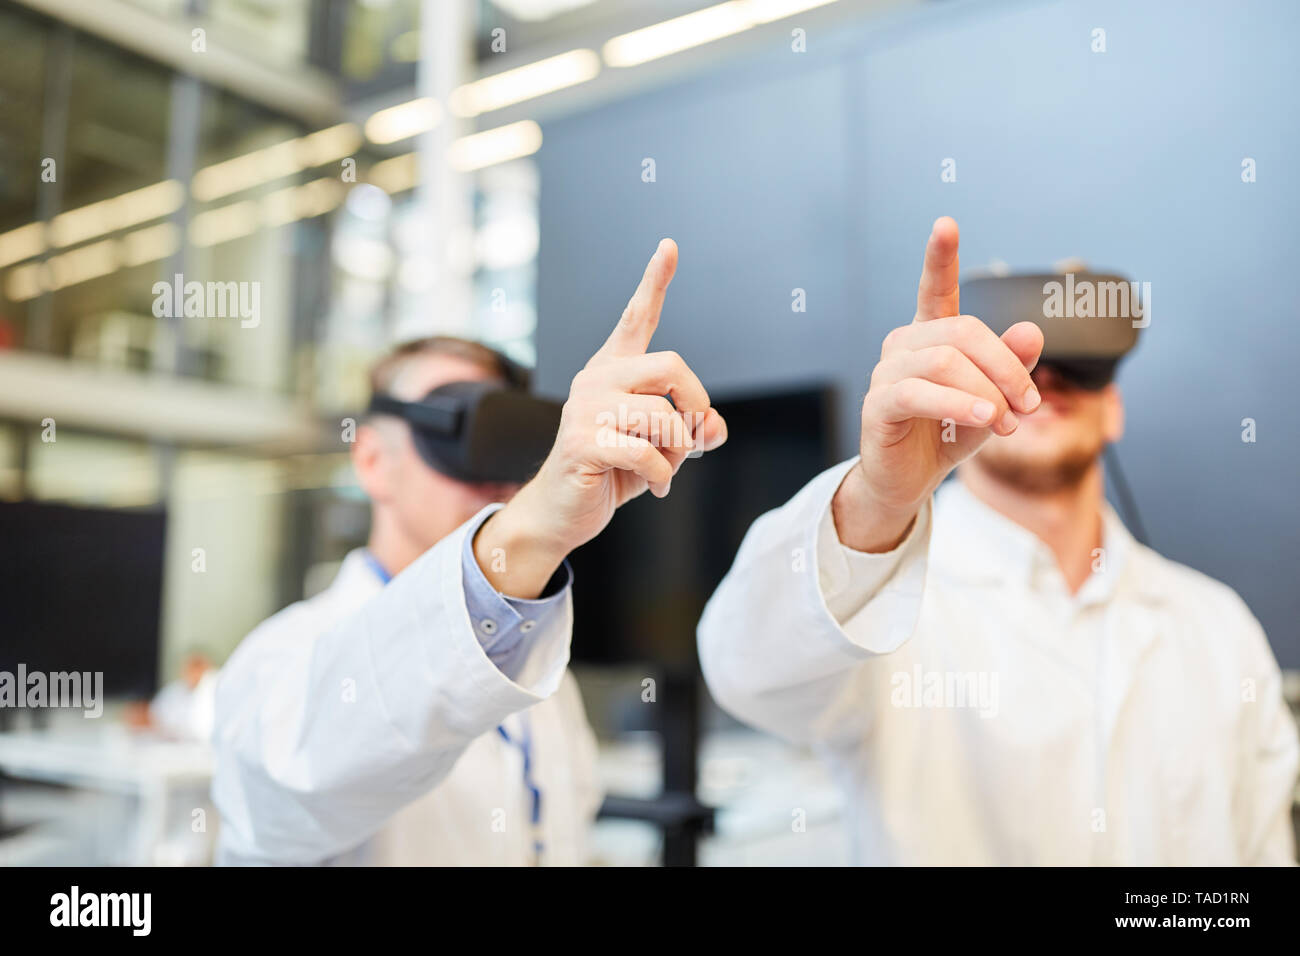 Scientist with VR glasses learning and exercising in 3D simulation for medicine research Stock Photo